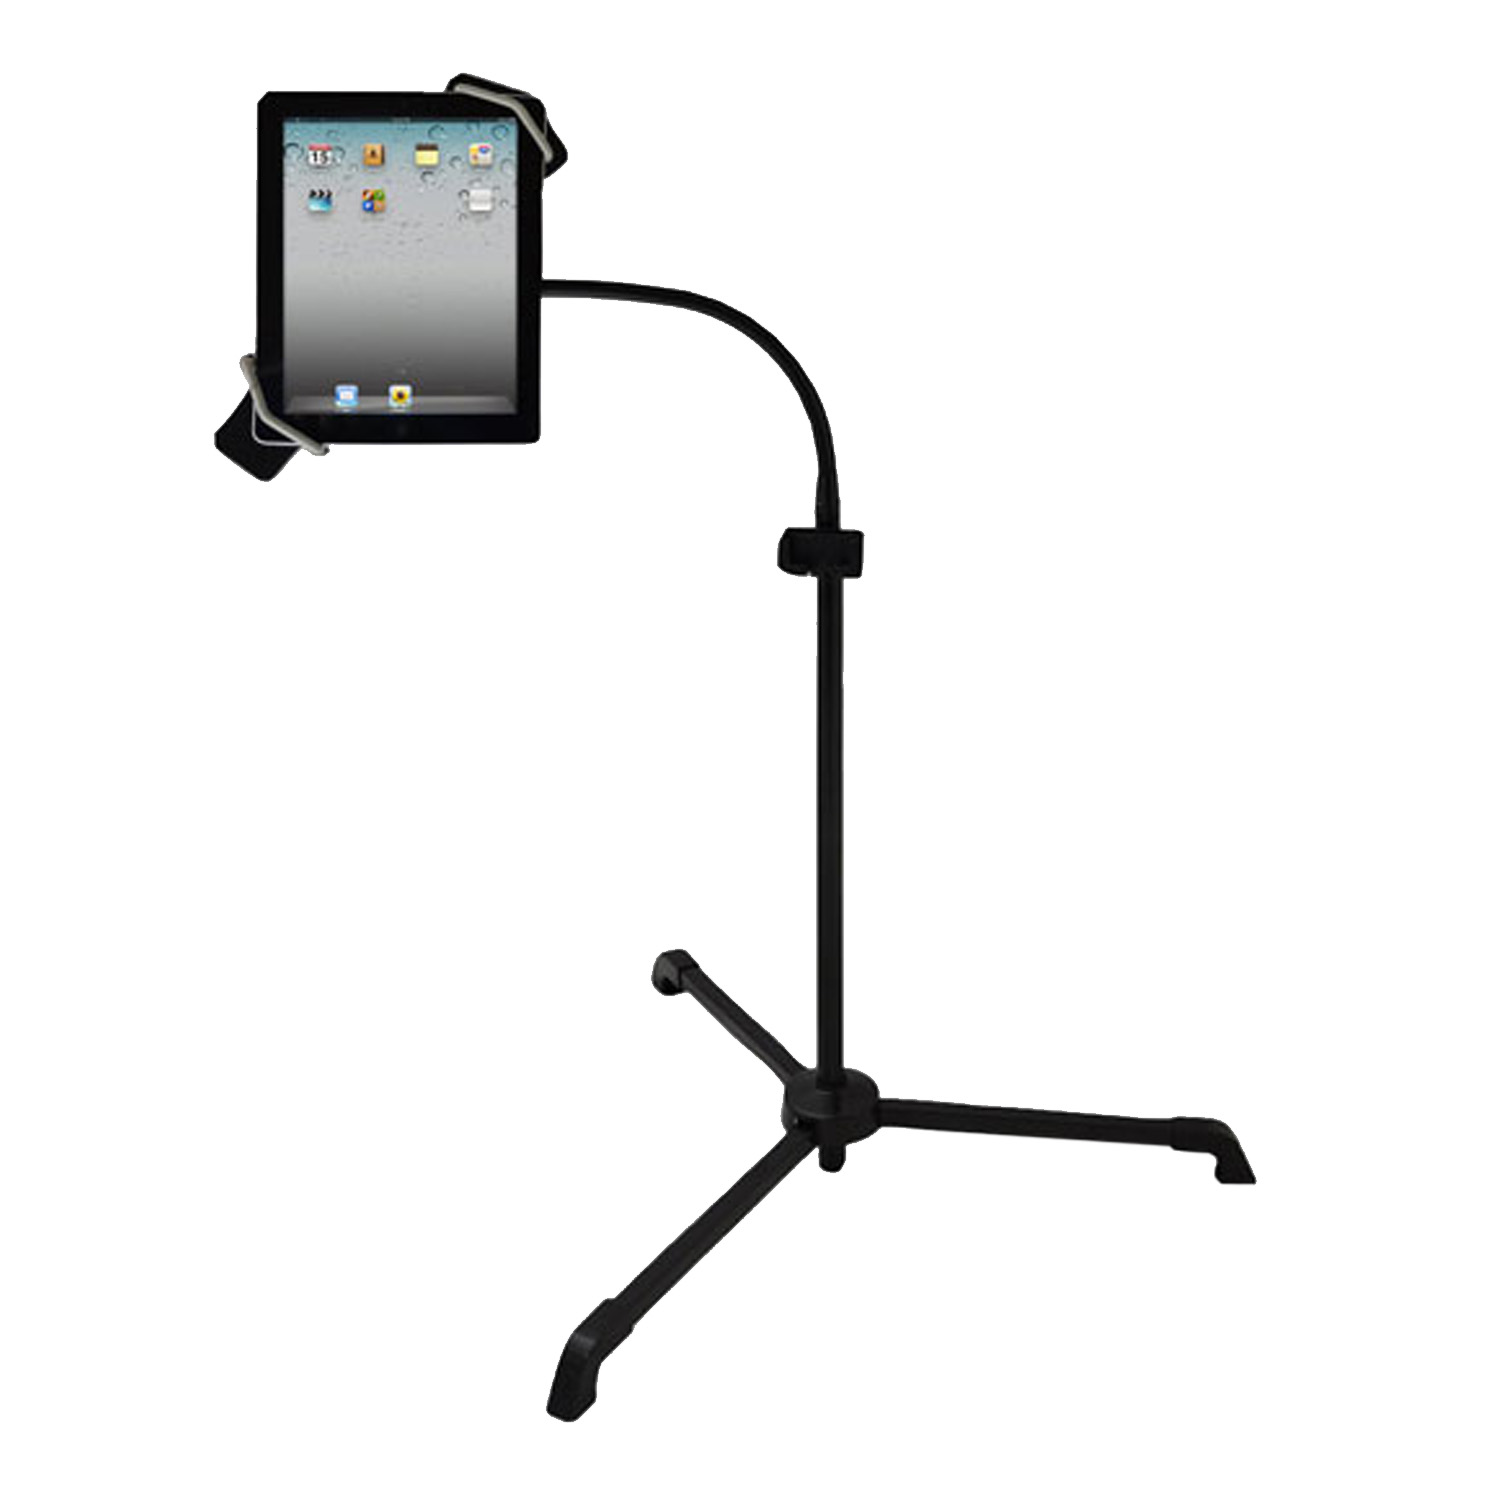 Pyle Universal Tablet PC/Android/Kindle/iPad Floor Stand For Music, Reading, Bedside Use,Fitness Use